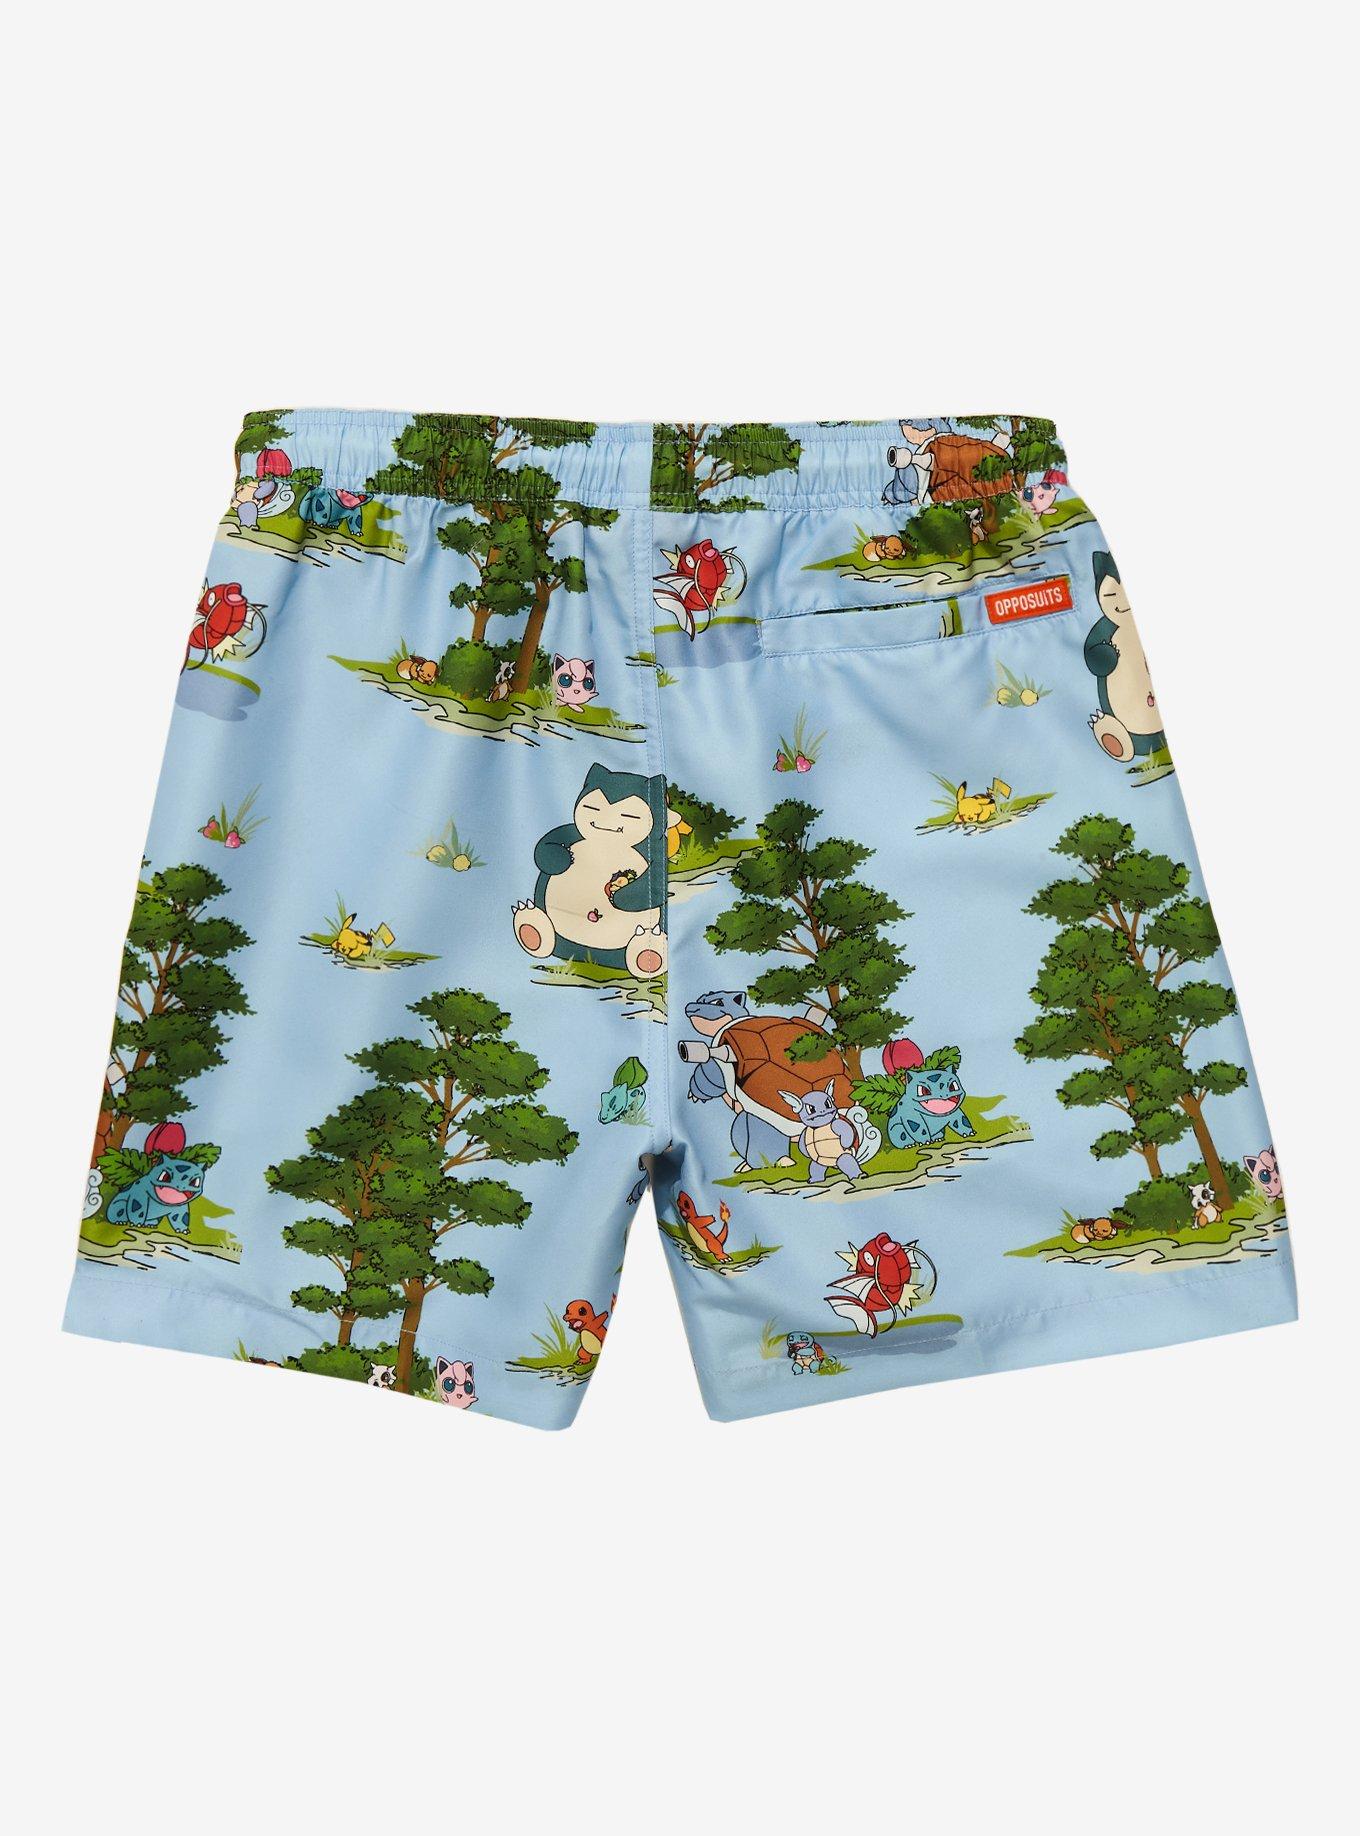 OppoSuits Pokémon Forest Allover Print Shorts - BoxLunch Exclusive, LIGHT BLUE, alternate